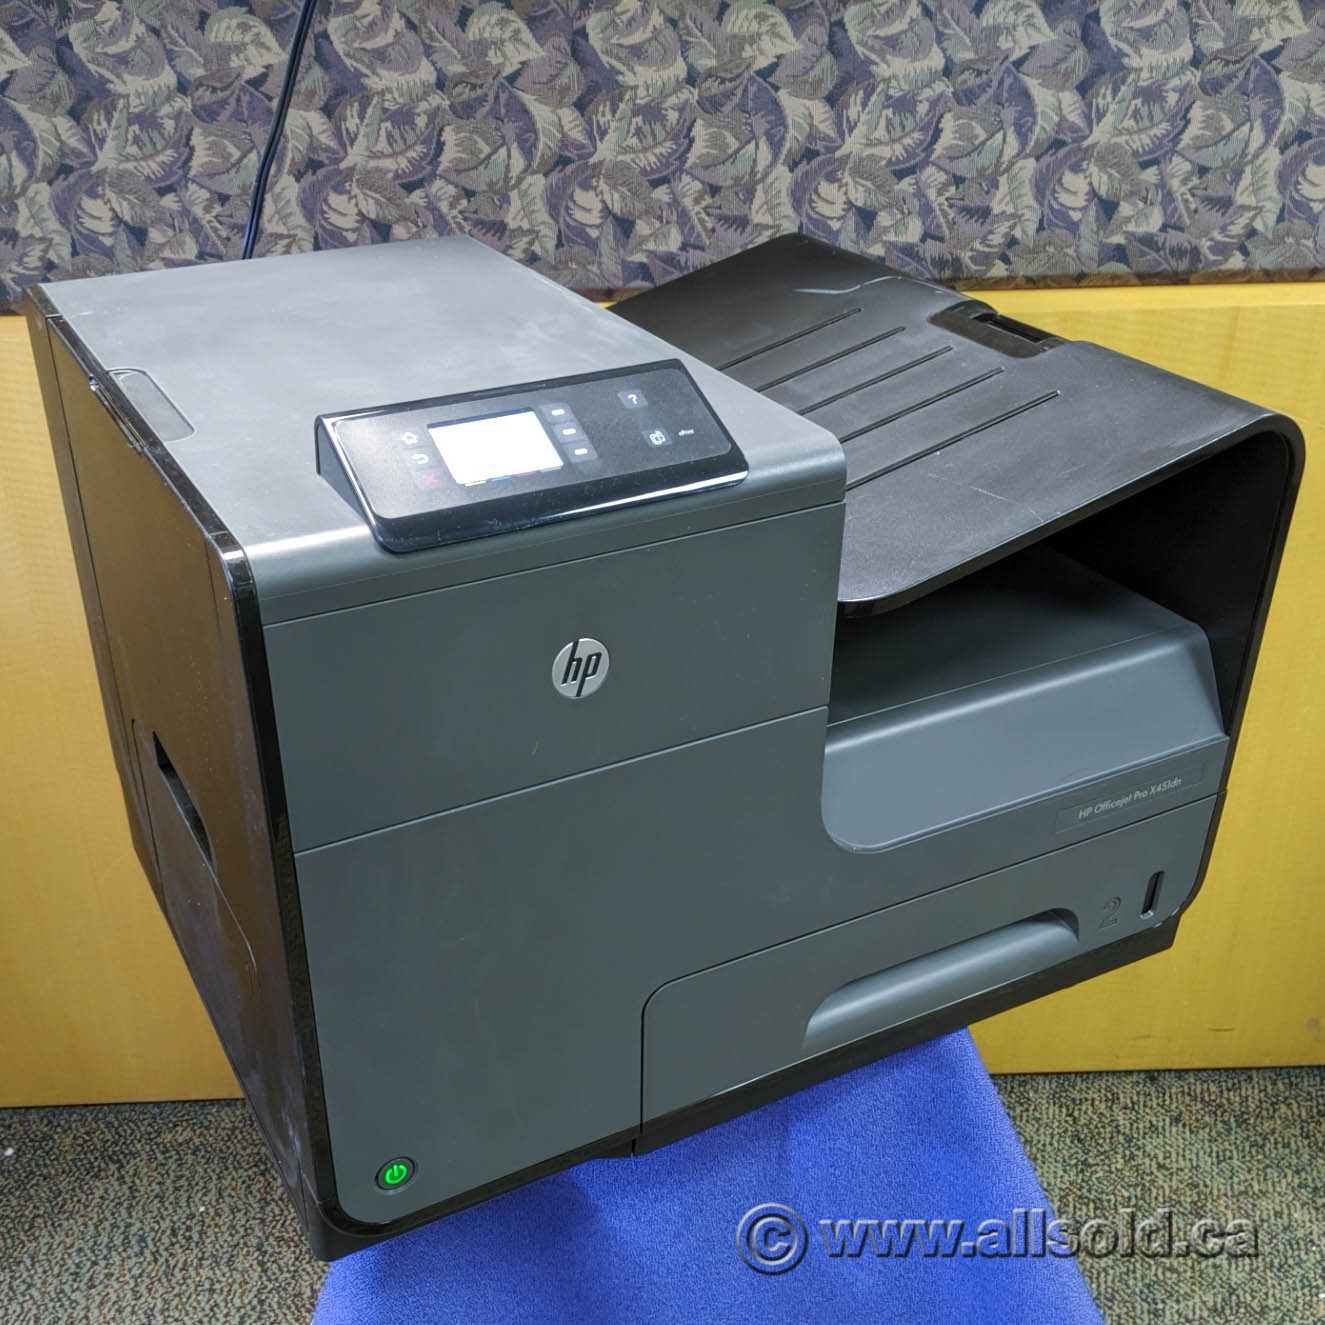 Hp Officejet Pro X451dn Printer Allsoldca Buy And Sell Used Office Furniture Calgary 7028